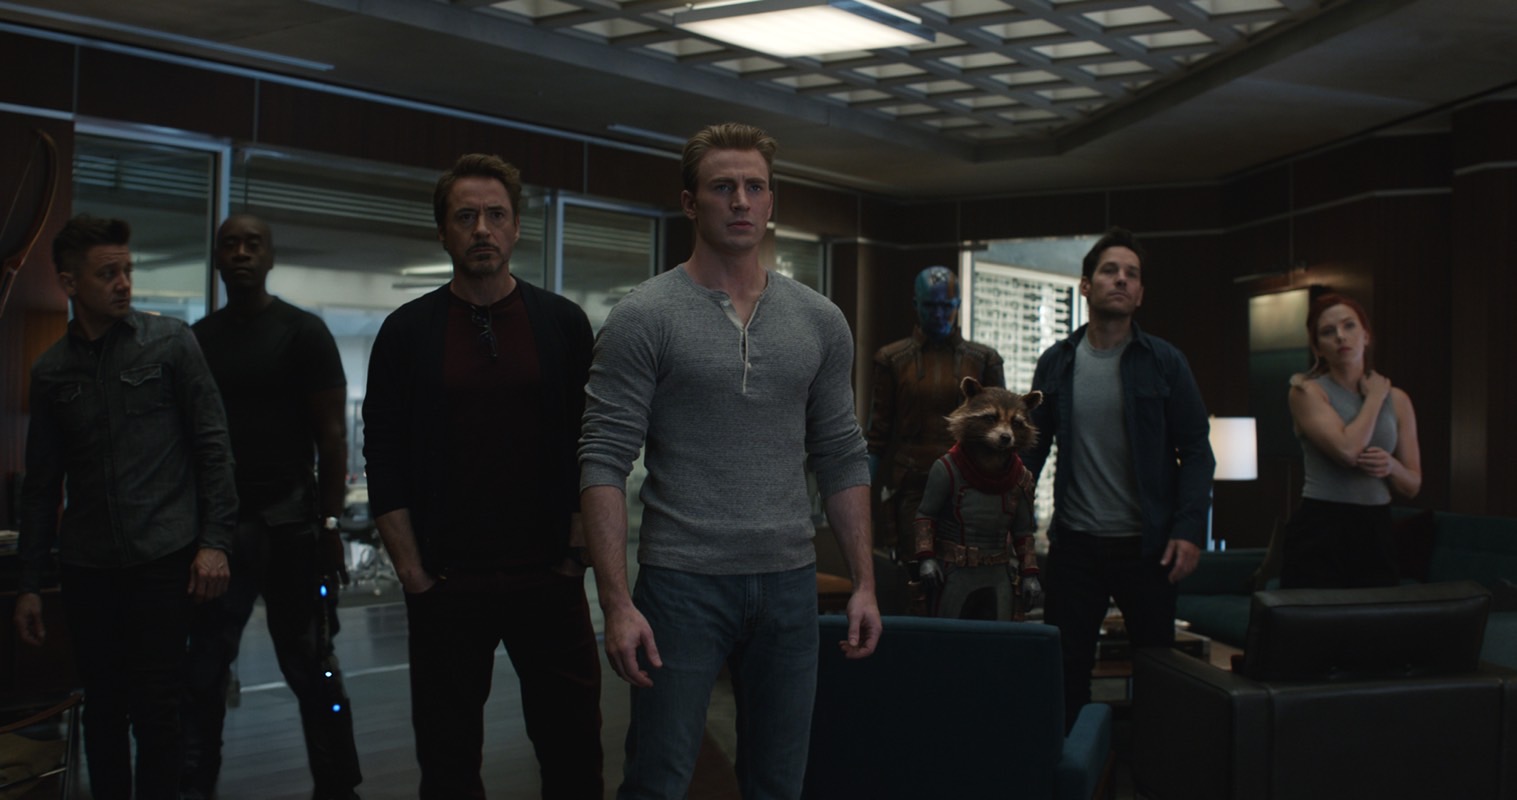 Leaks suggest that the exciting Avengers 5 trilogy is in development